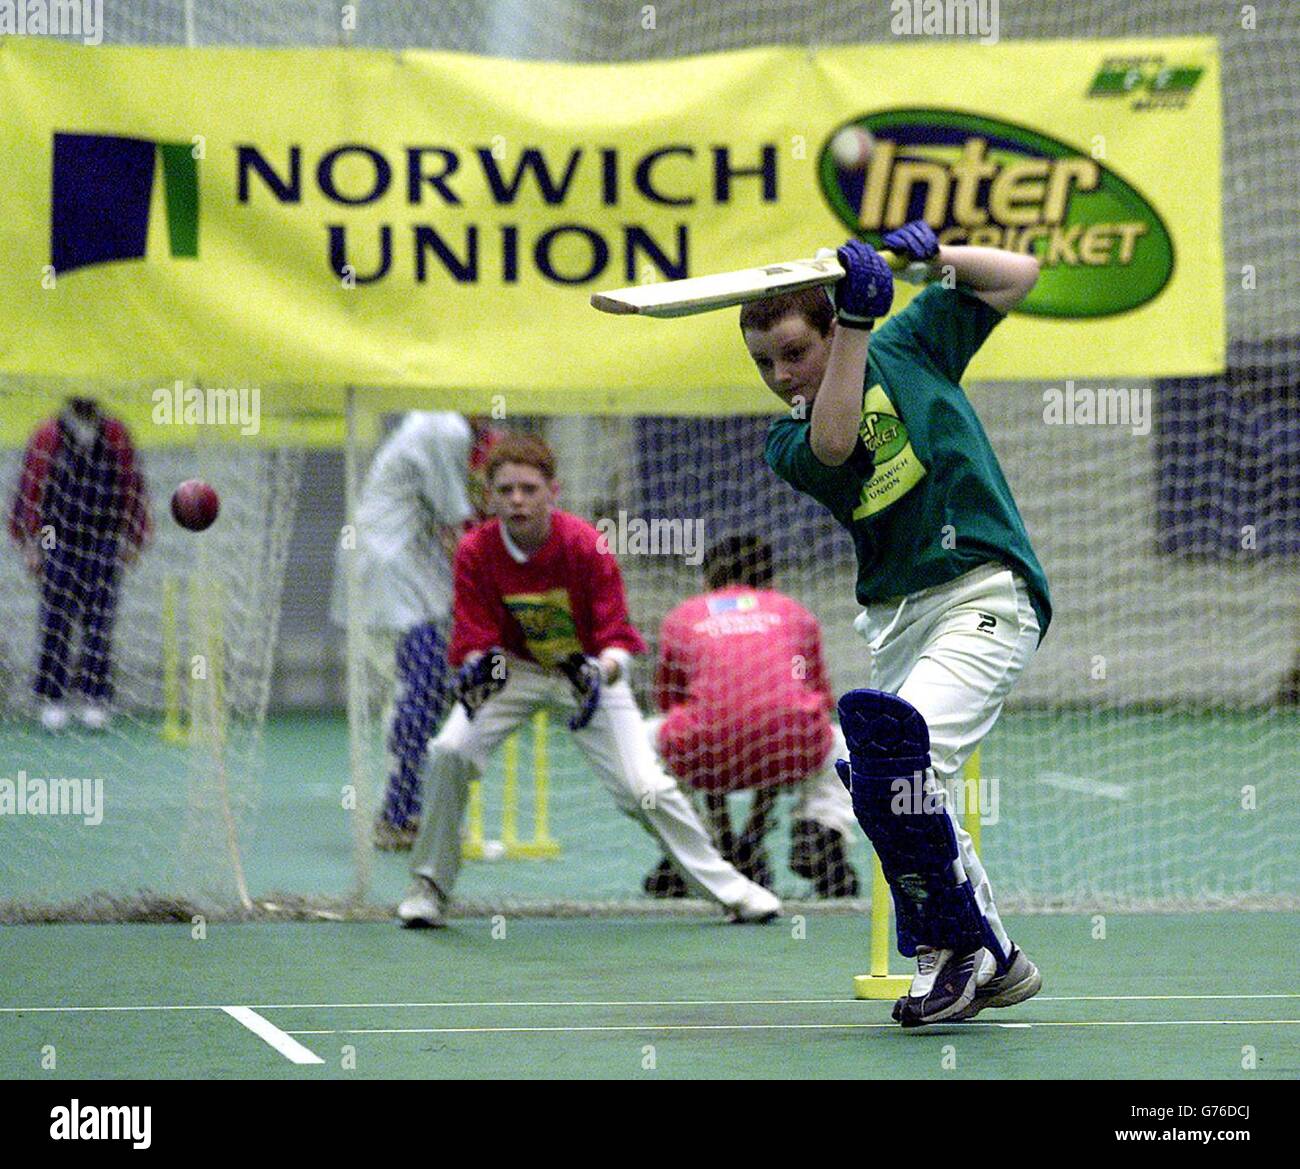 Laurence Lewis of Liverpool College batting against St Francis Xavier High School, Liverpool, while playing the Norwich Union Inter Cricket County Finals, at Old Trafford Indoor School, Lancs CCC in Manchester. Stock Photo